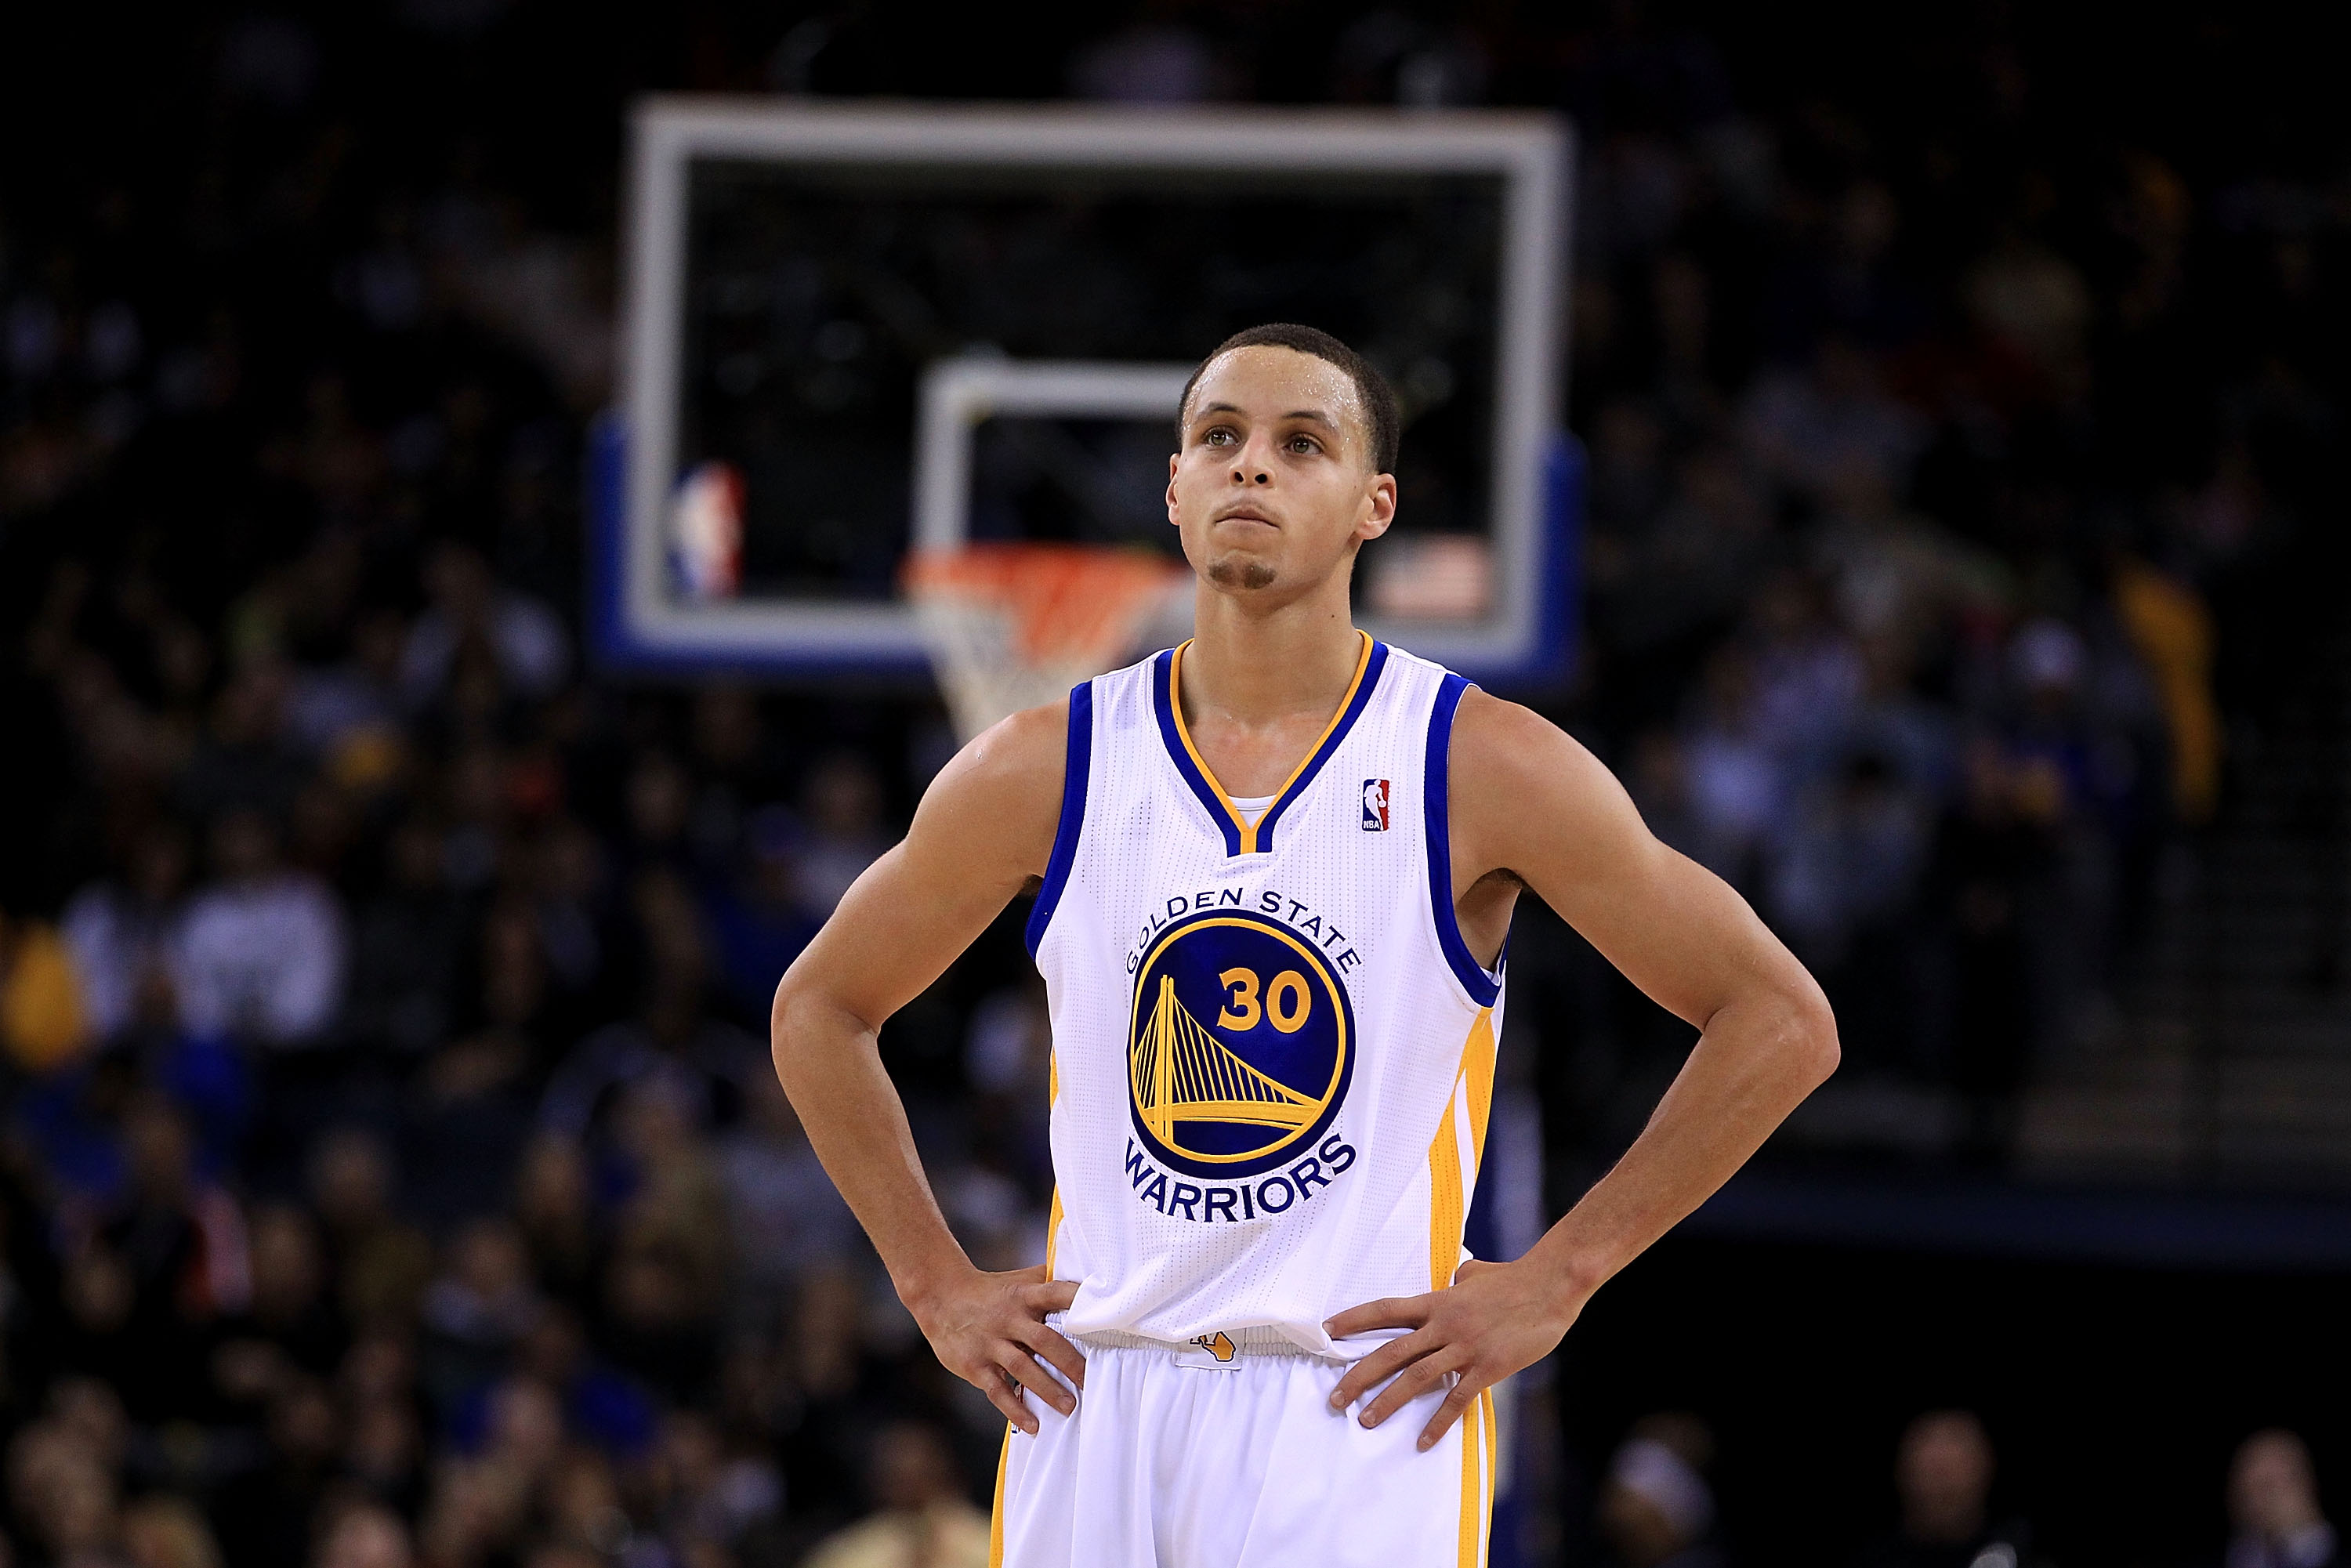 OAKLAND, CA - JANUARY 24:  Stephen Curry #30 of the Golden State Warriors stands at midcourt during their game against the San Antonio Spurs at Oracle Arena on January 24, 2011 in Oakland, California.  NOTE TO USER: User expressly acknowledges and agrees